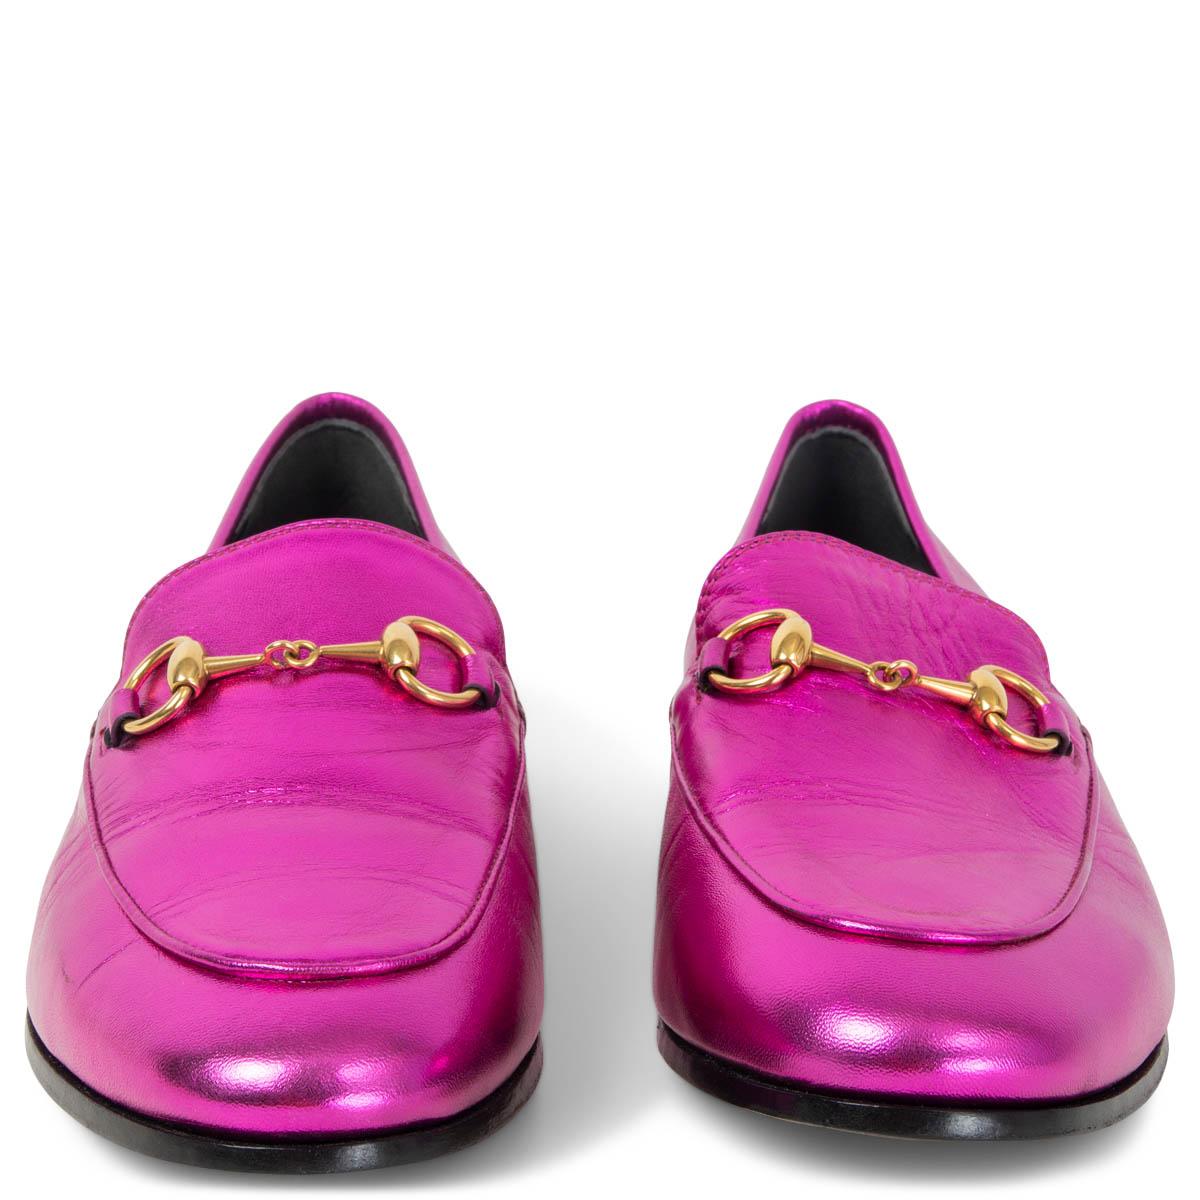 100% authentic Gucci Jordaan loafers in metallic fuchsia leather embellished with gold-tone signature horsebit. Brand new. Come with dust bag. 

Measurements
Imprinted Size	37.5
Shoe Size	37.5
Inside Sole	25cm (9.8in)
Width	7.5cm (2.9in)
Heel	1.5cm